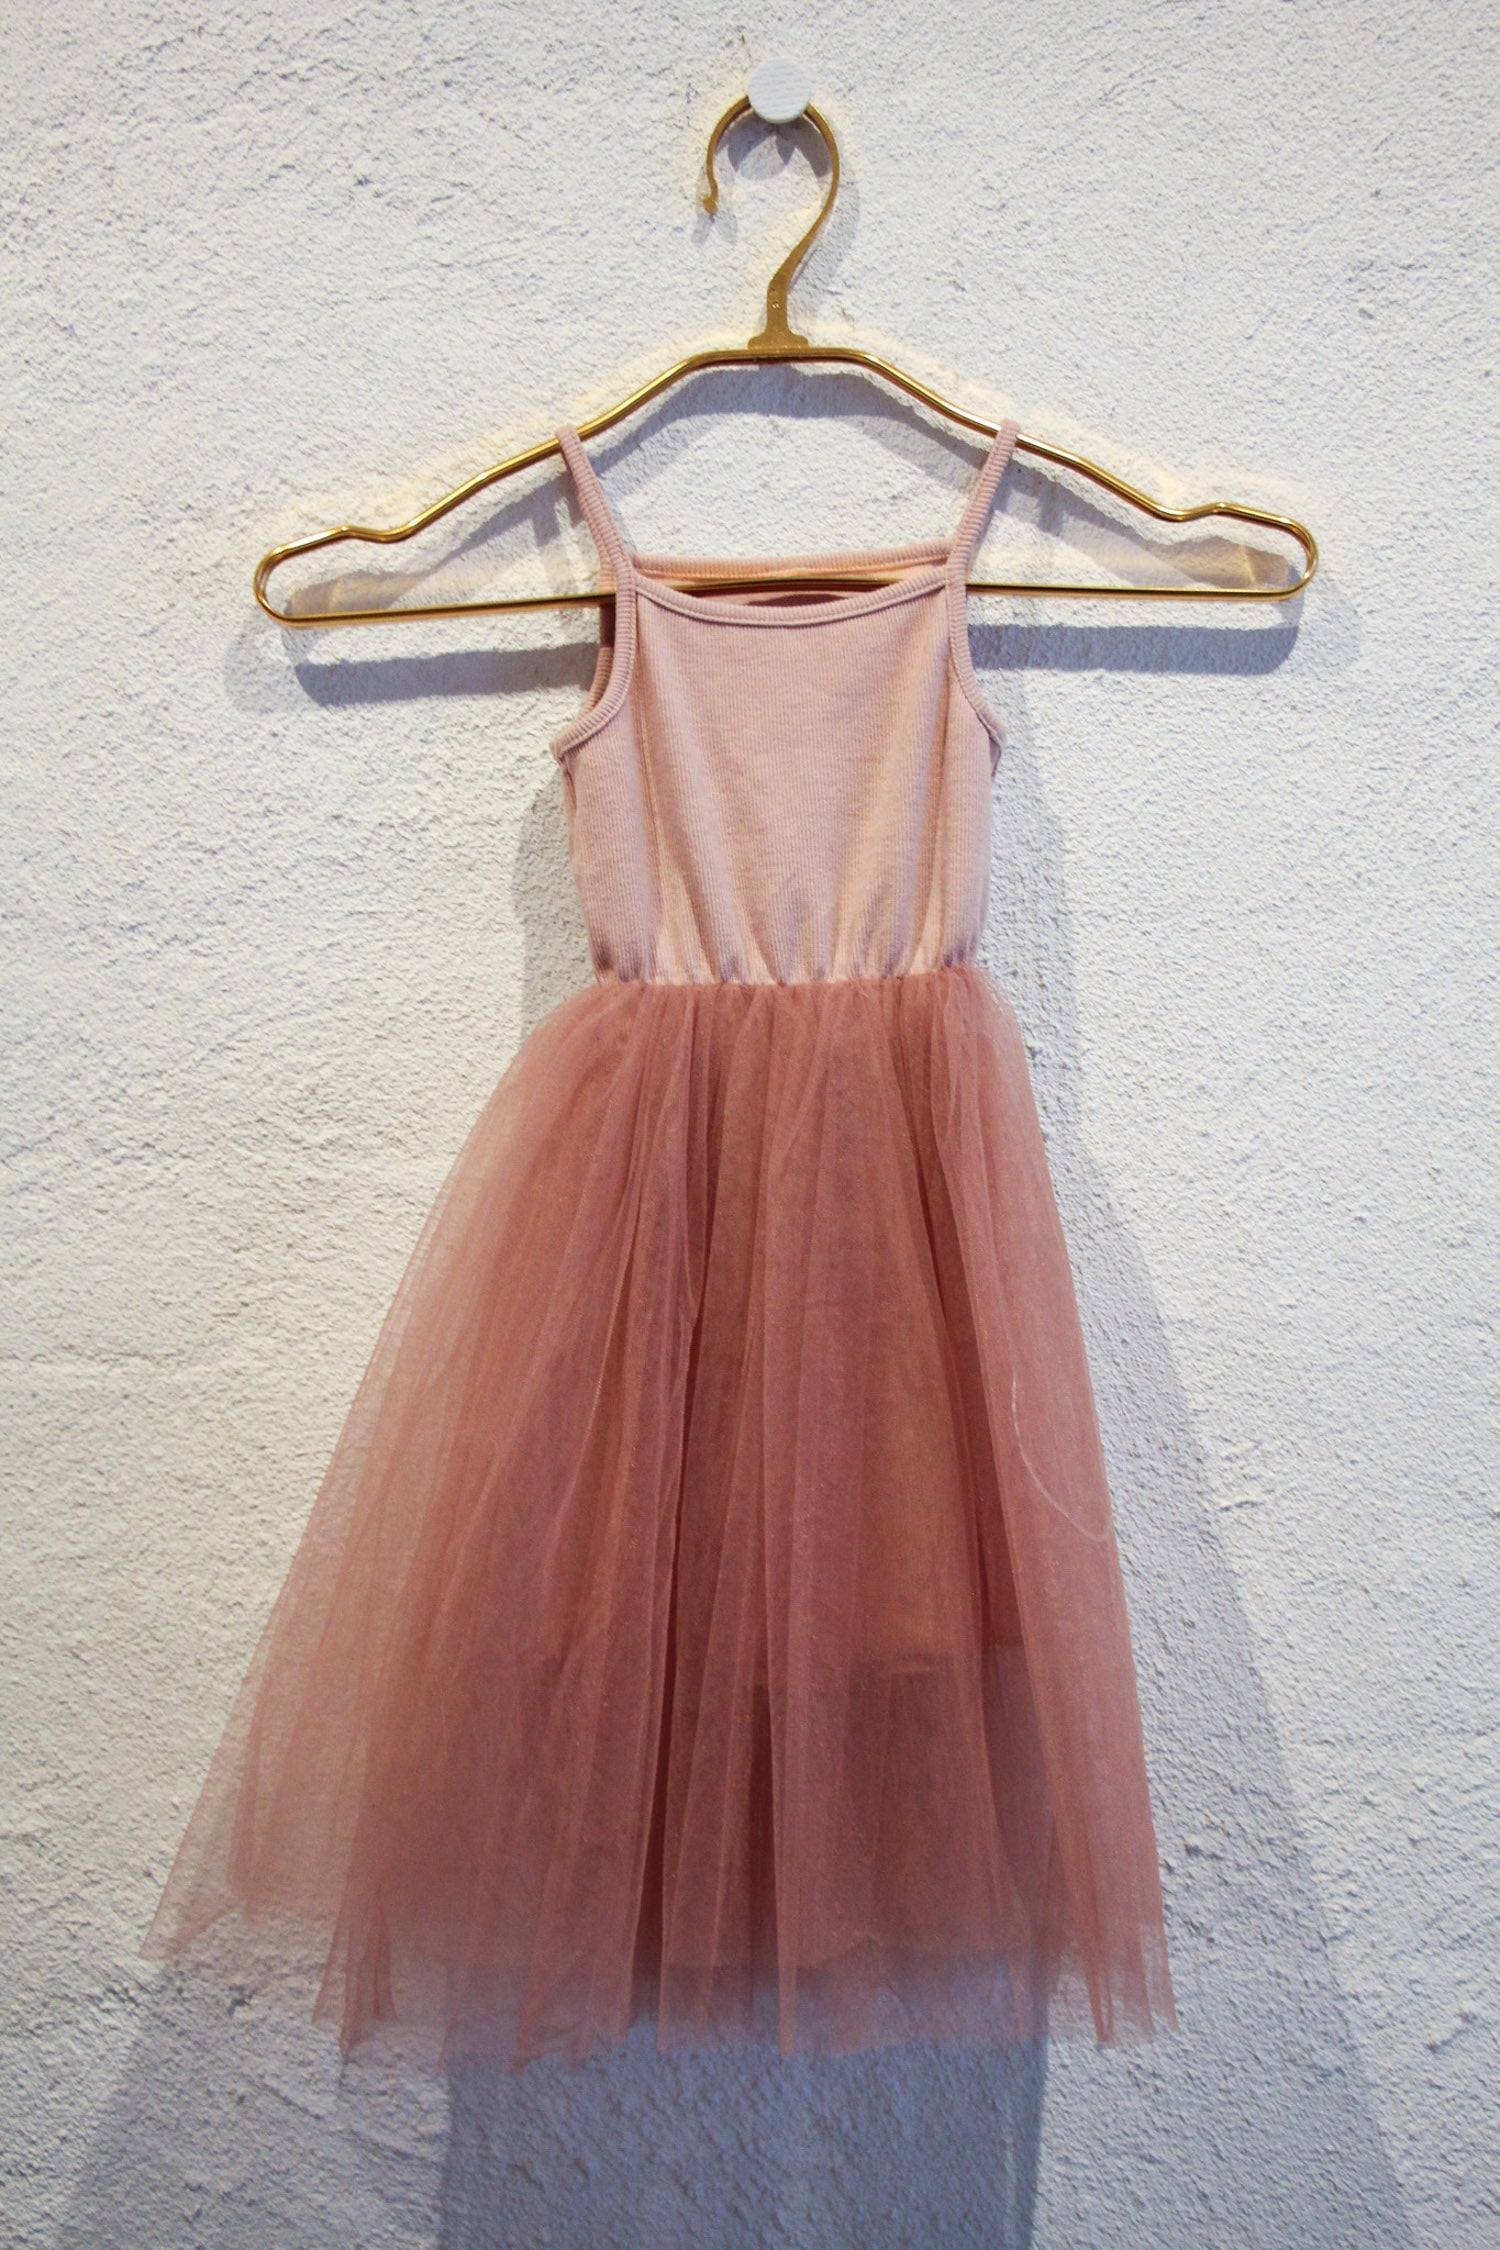 Tutu Singlet Dress in French Rose - Mode & Affaire